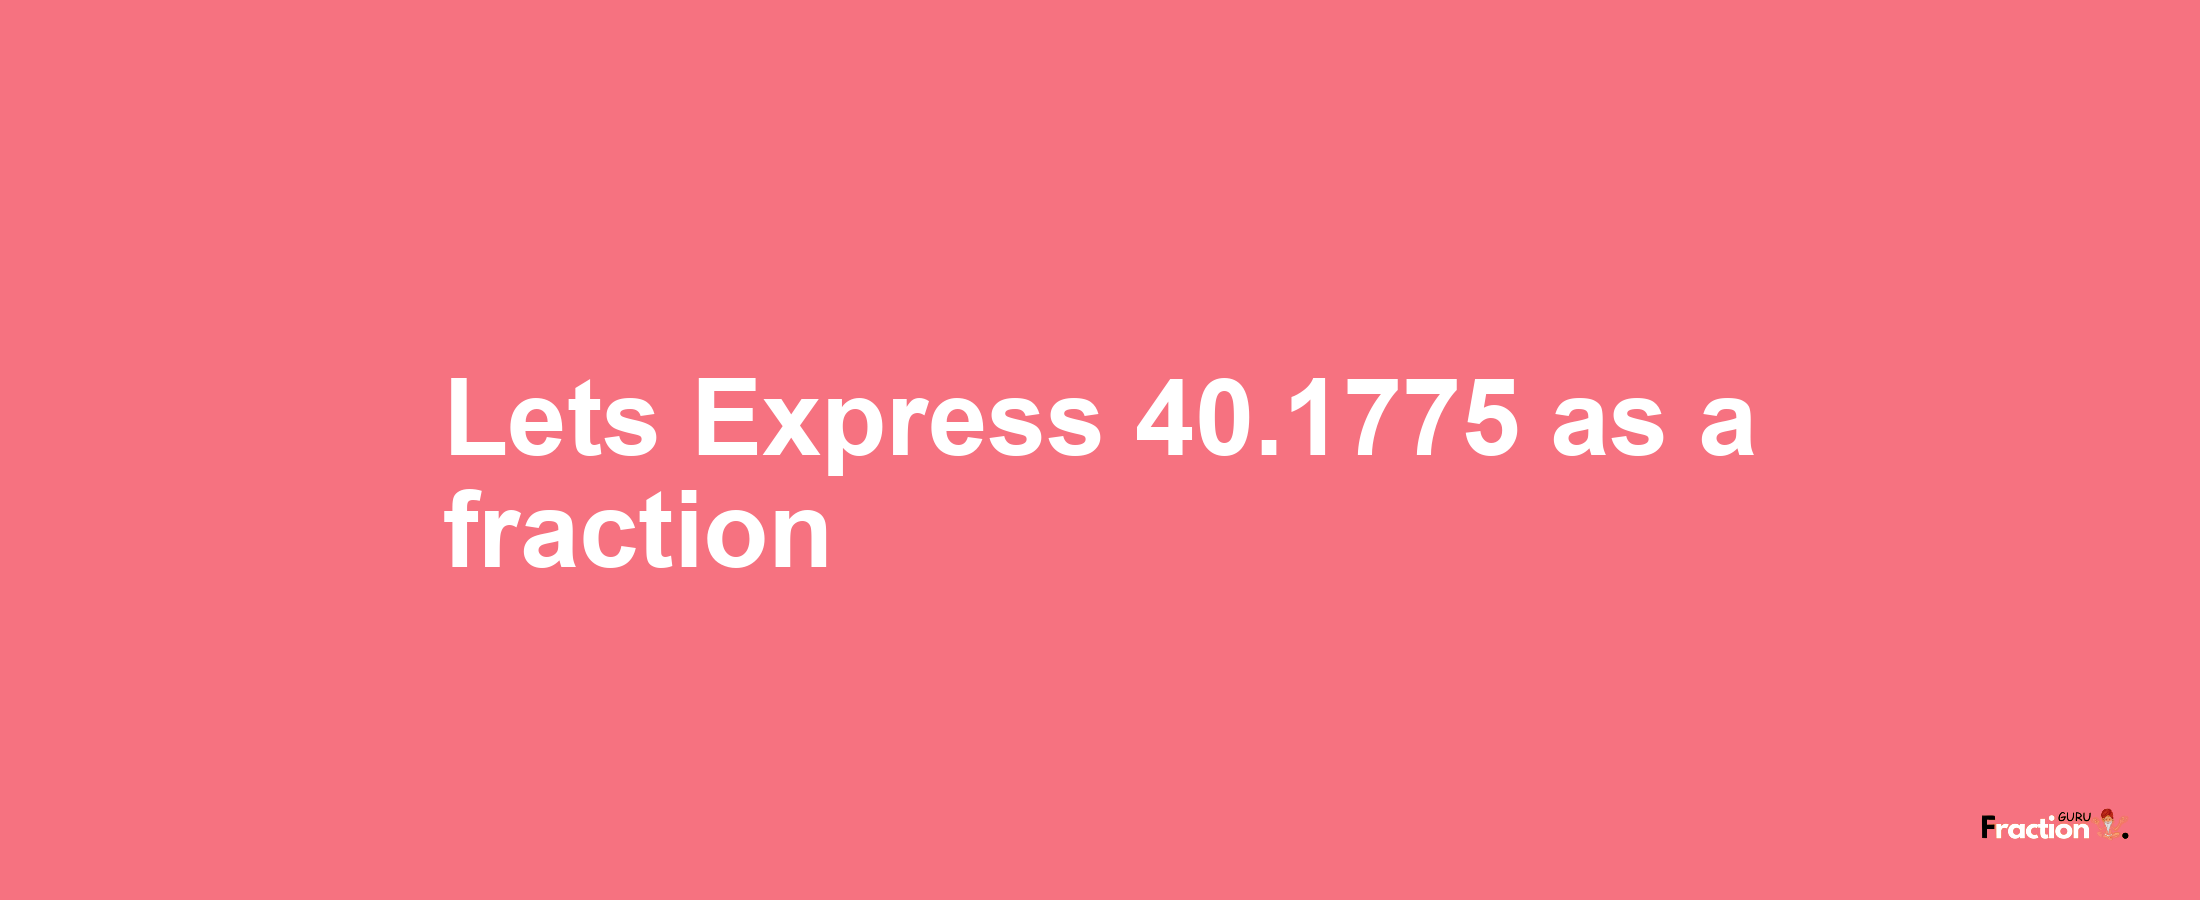 Lets Express 40.1775 as afraction